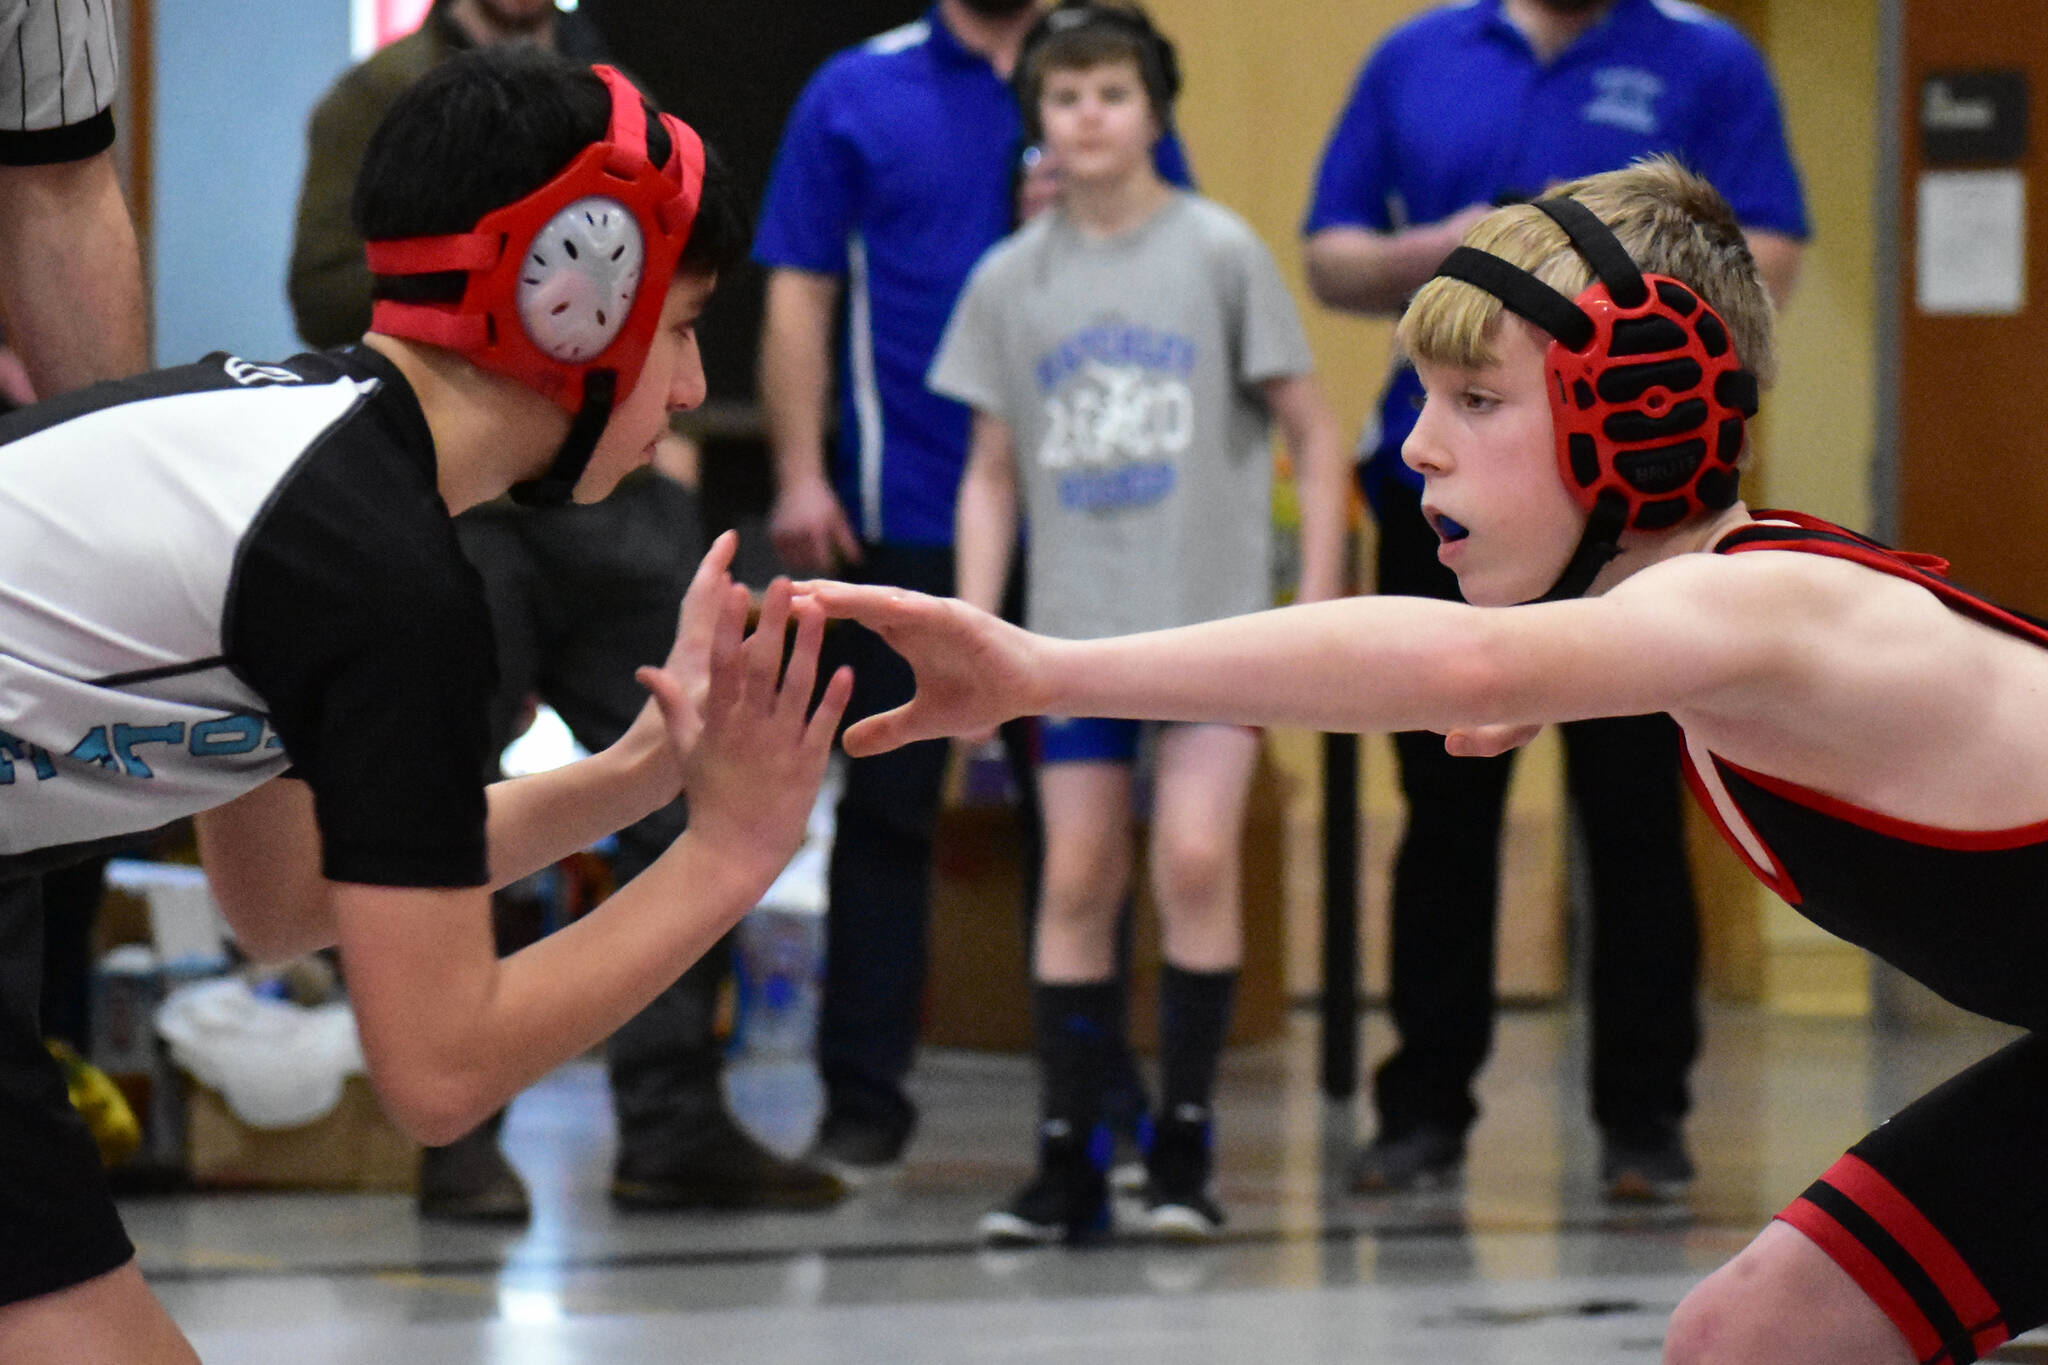 Two students face off for a match at the 2020 Southeast Alaska Middle School Wrestling Championship at Floyd Dryden Middle School on Friday, Feb. 14, 2020. The Juneau School District Board of Education on Tuesday accepted a donation that will provide the middle school with a new wrestling mat. (Peter Segall / Juneau Empire File)